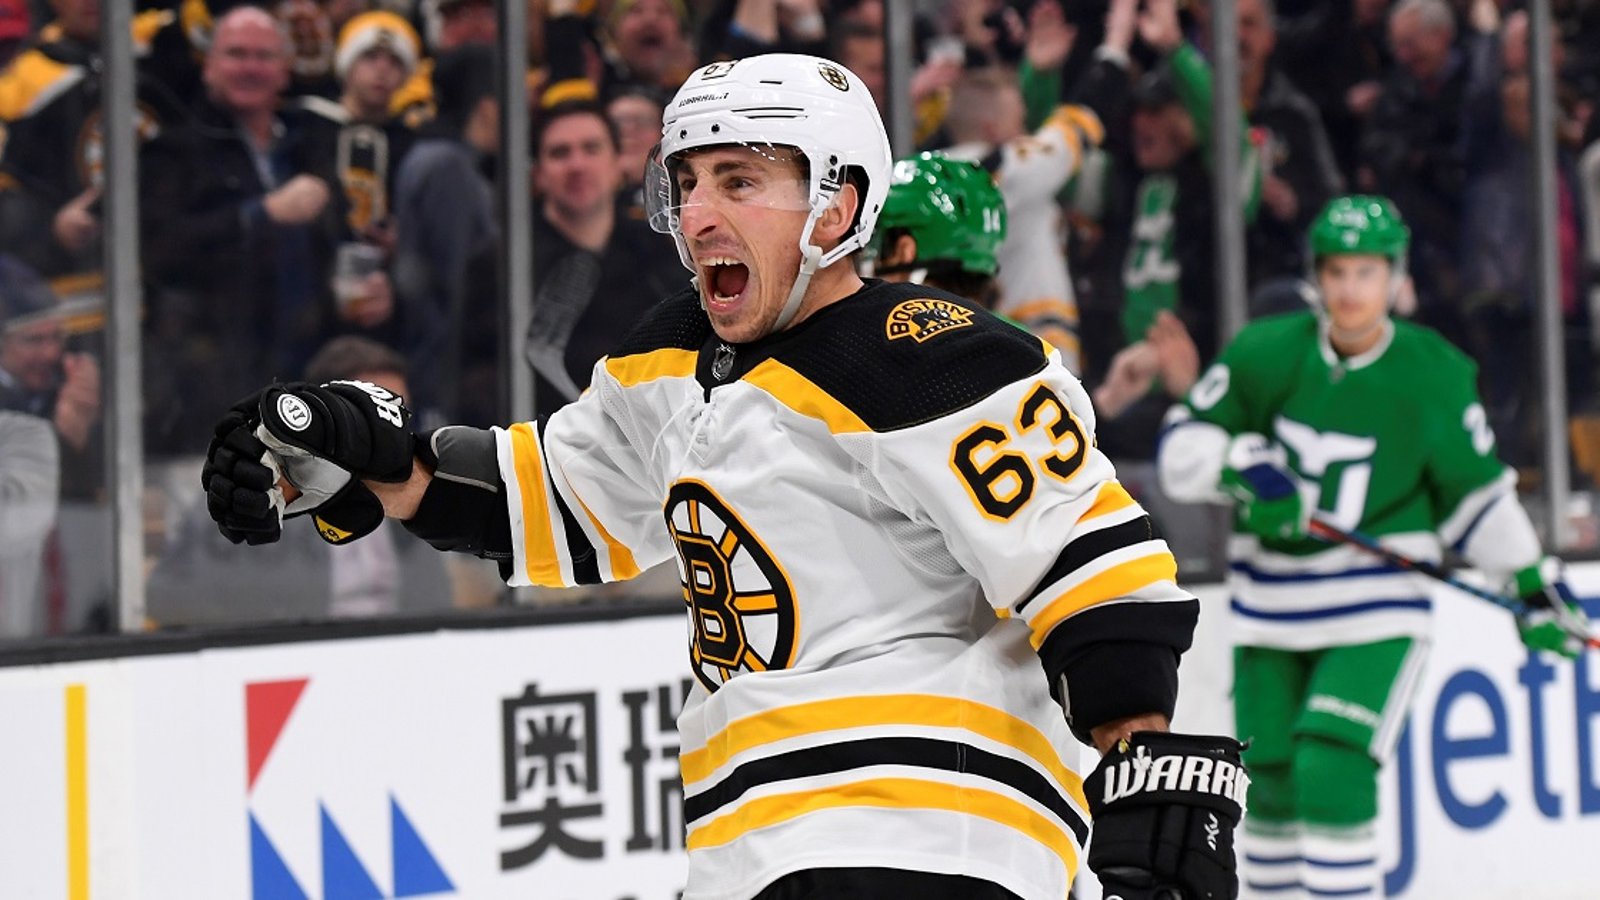 Big updates on Brad Marchand and David Backes ahead of rematch against the Habs.